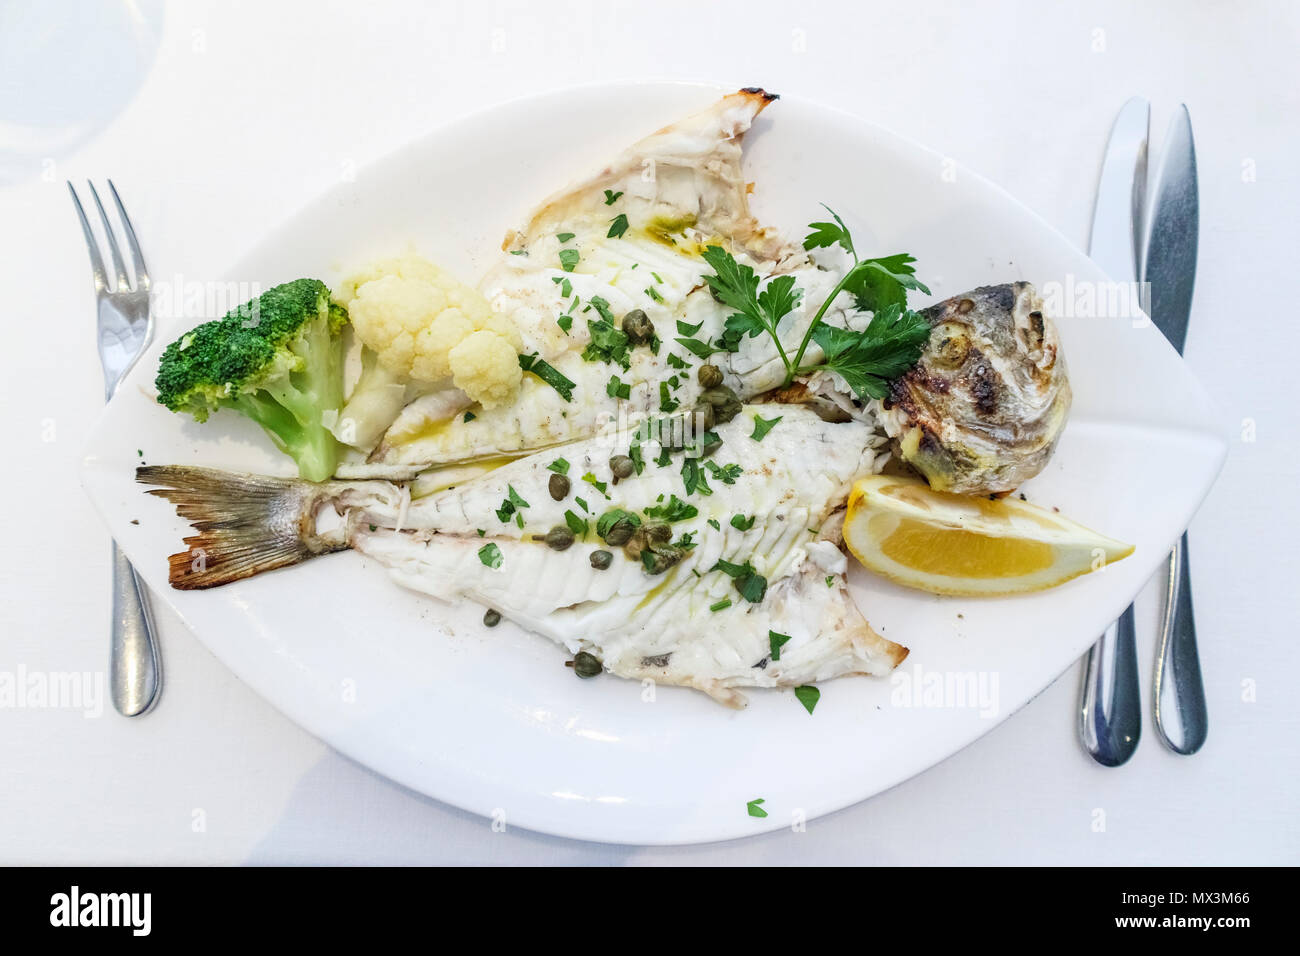 Fine dining: a main course of grilled sea bream (dorade) served on a white plate with a garnish of capers, broccoli and cauliflower and slice of lemon Stock Photo